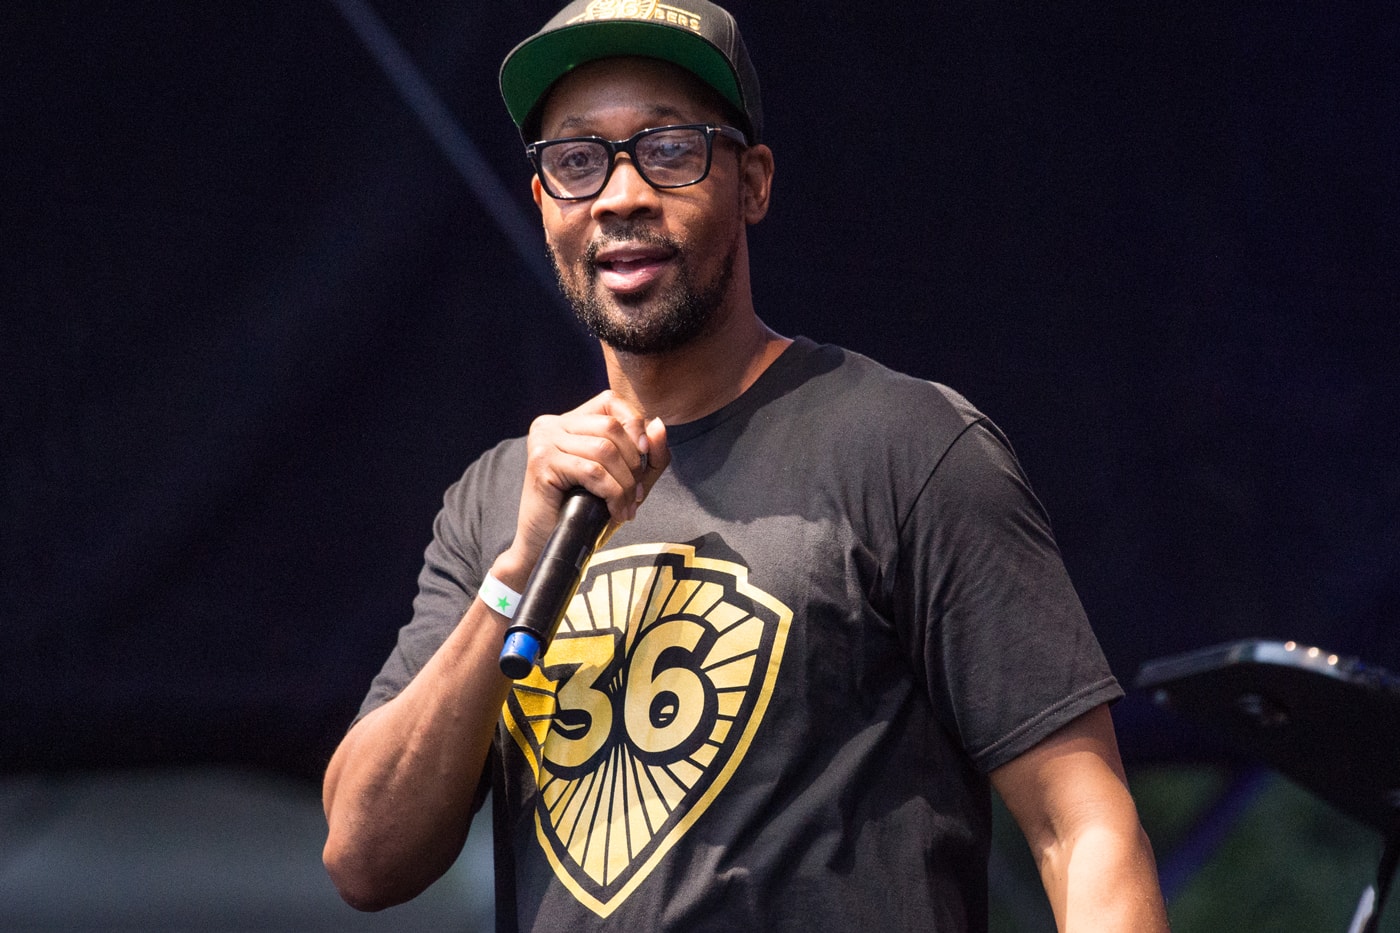 RZA Interview rolling stone martin shkreli once upon a time in shaolin wu tang clan